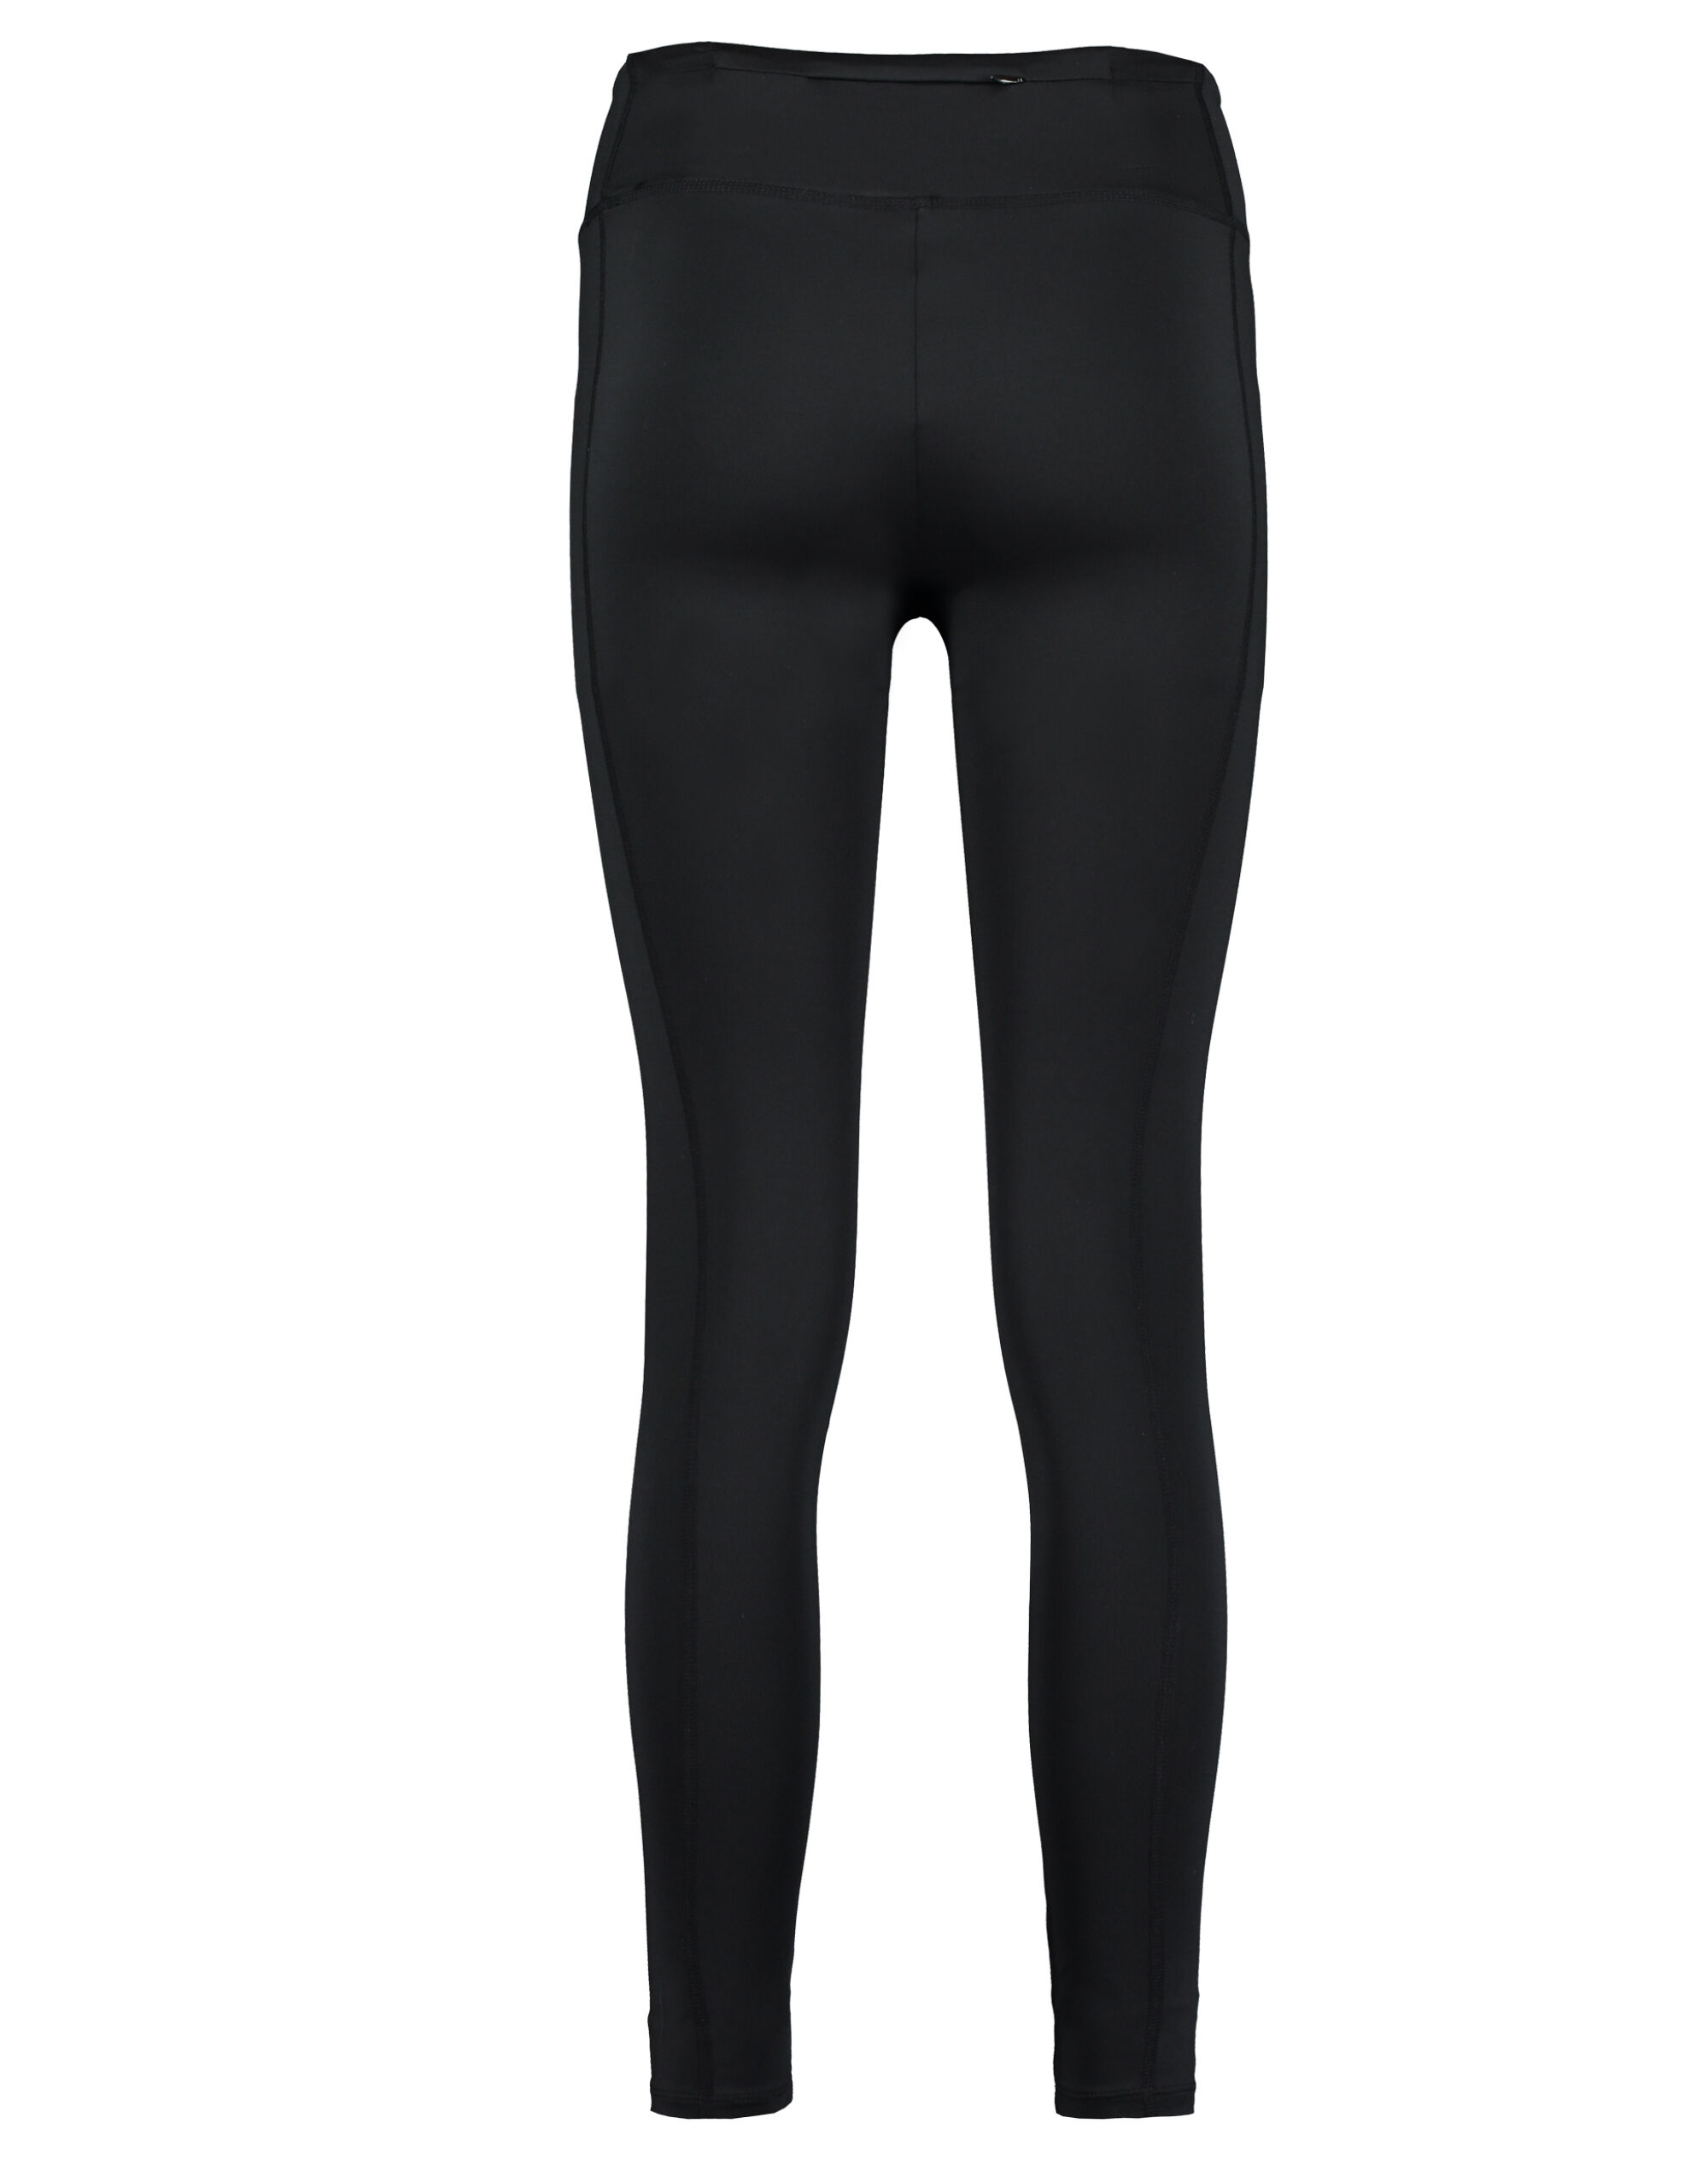 Picture of Fashion Fit Full Length Legging